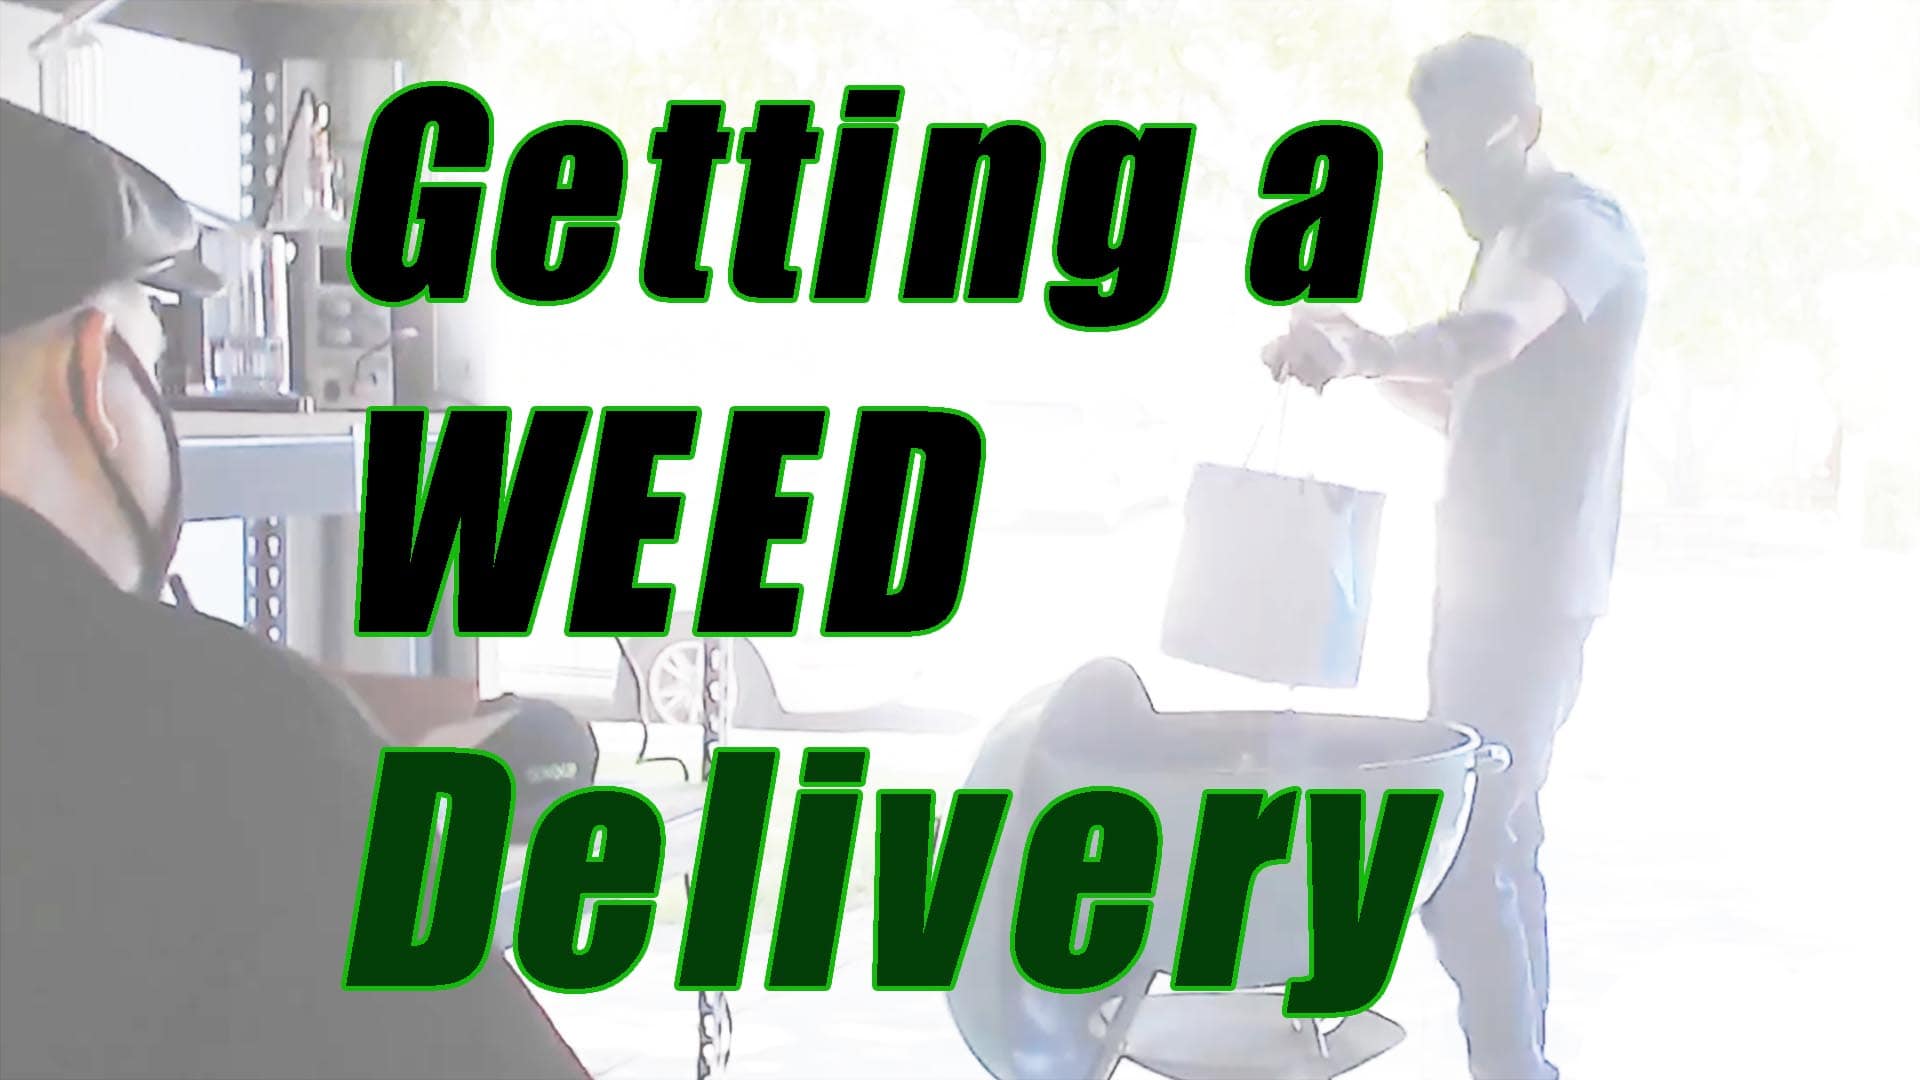 This is how I get legal weed delivery in California